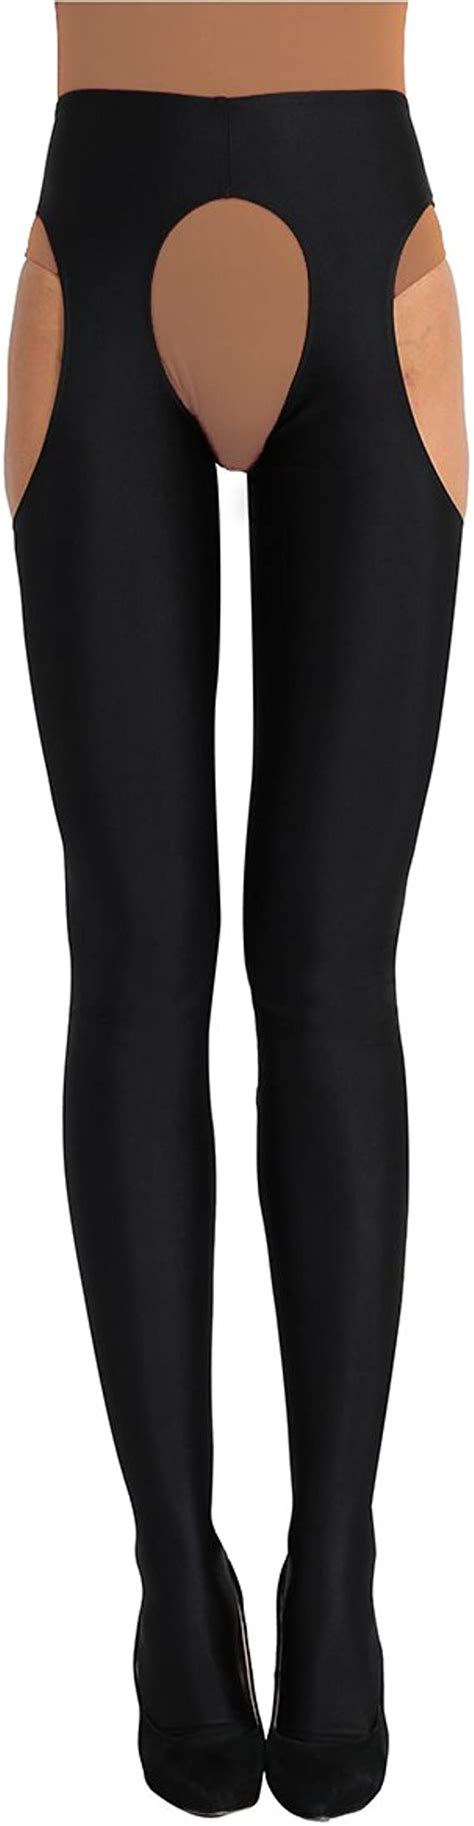 Jeeyjoo Womens Sexy Crotchless Leggings Trousers Thigh